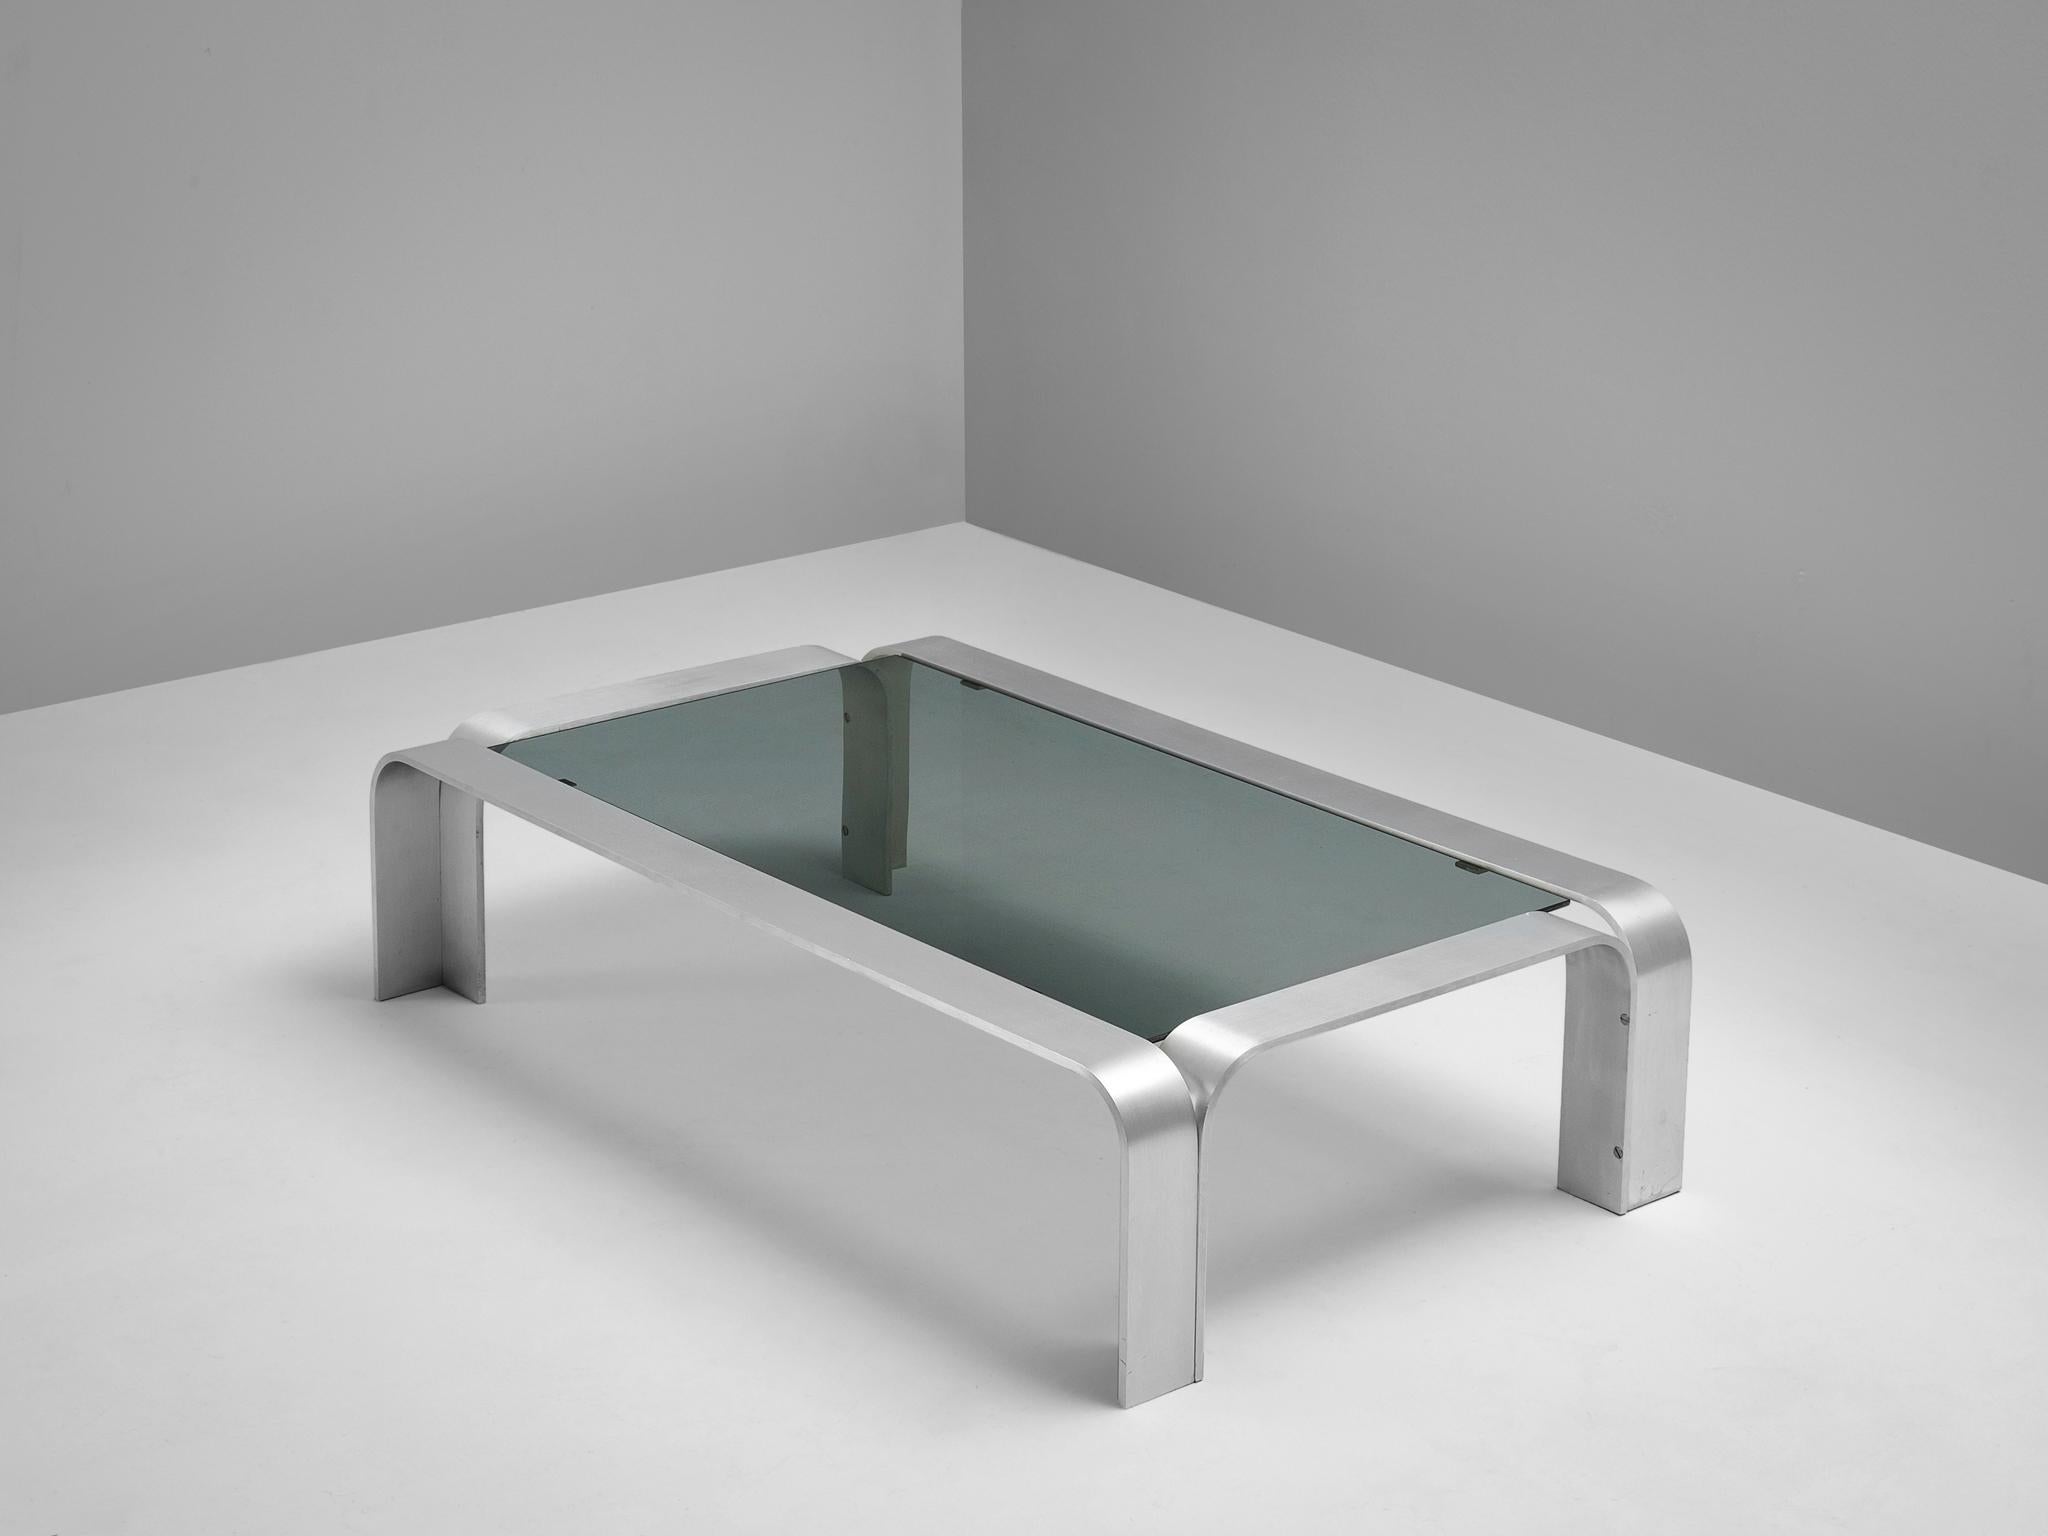 Coffee table, aluminum and glass, European, 1970s.

Elegant modernist coffee table. The rectangular table is accompanied by a dark glass top. The aluminum frame consist of four bended arches. The frame is manufactured from metal strips and rounded